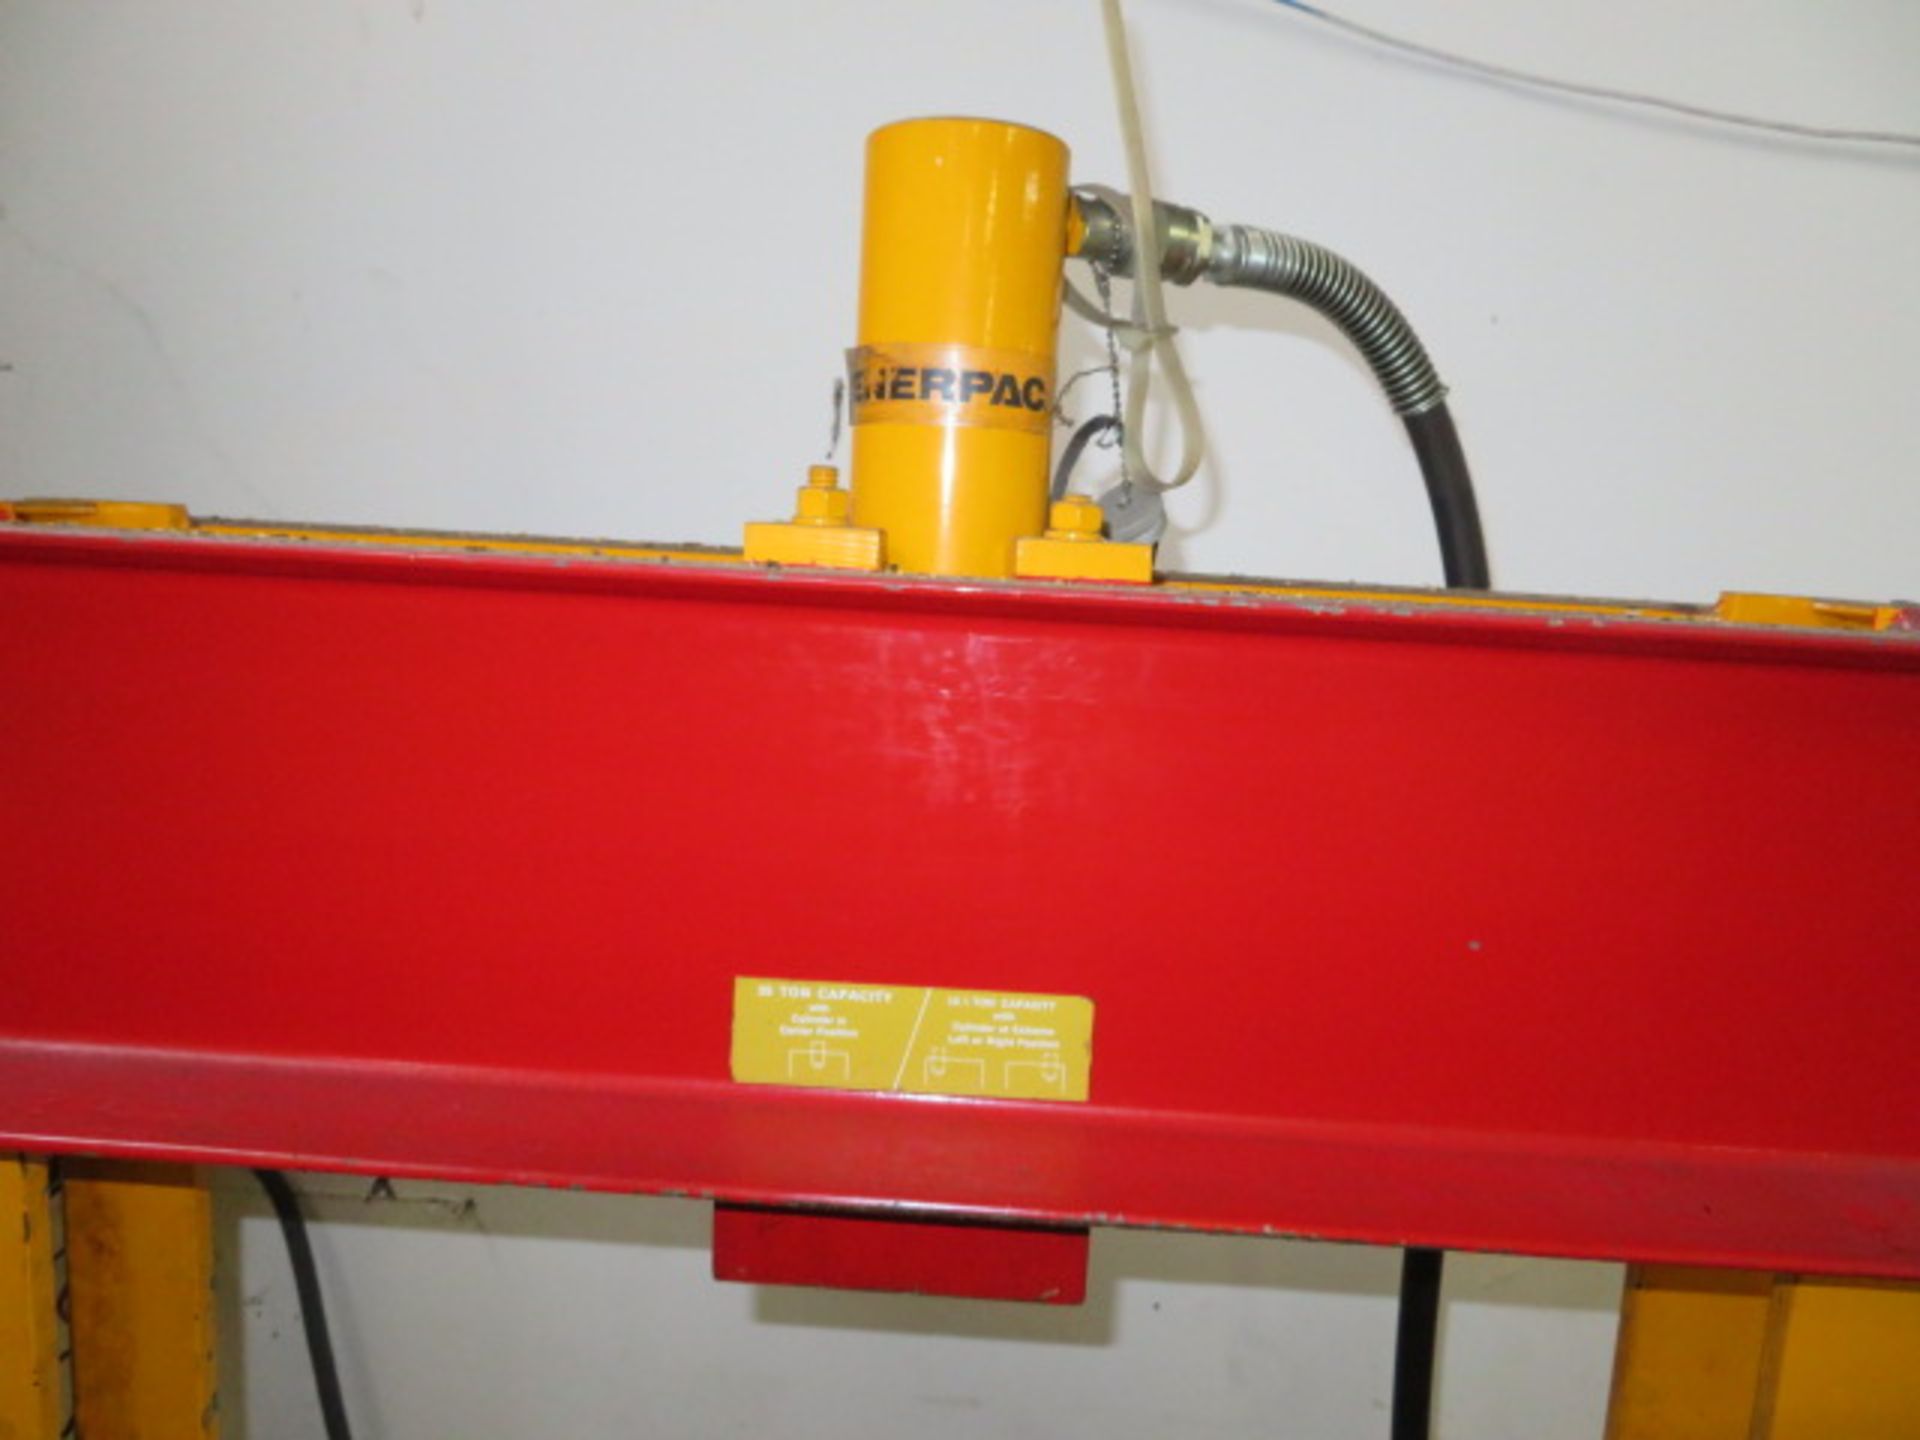 H-FRAME HYDRAULIC PRESS W/ENERPAC P-462 PUMP AND ENERPAC RAM, ENERPAC 1.5 TON HYDRA-LIFT - Image 3 of 3